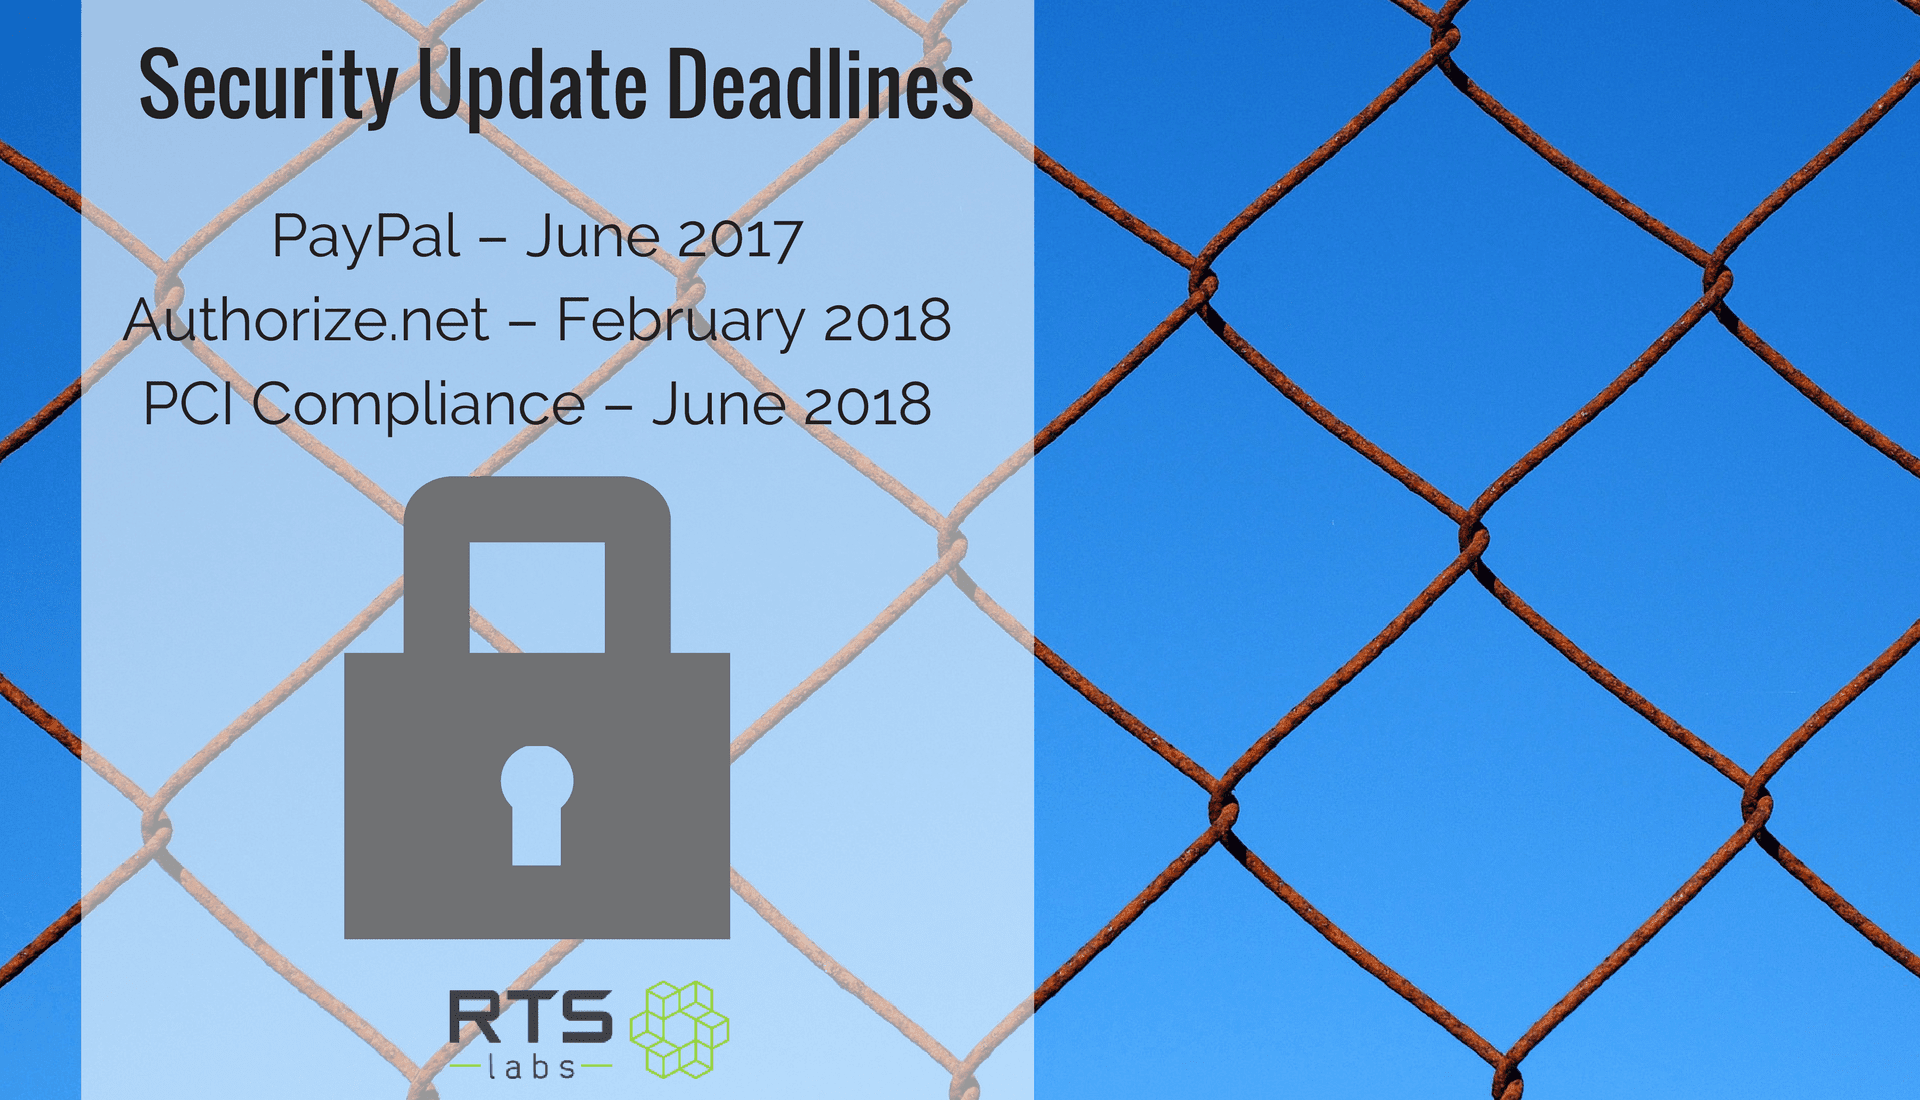 Security update deadlines Paypall June 2017 authorize.net February 2018 PCI Compliance June 2018